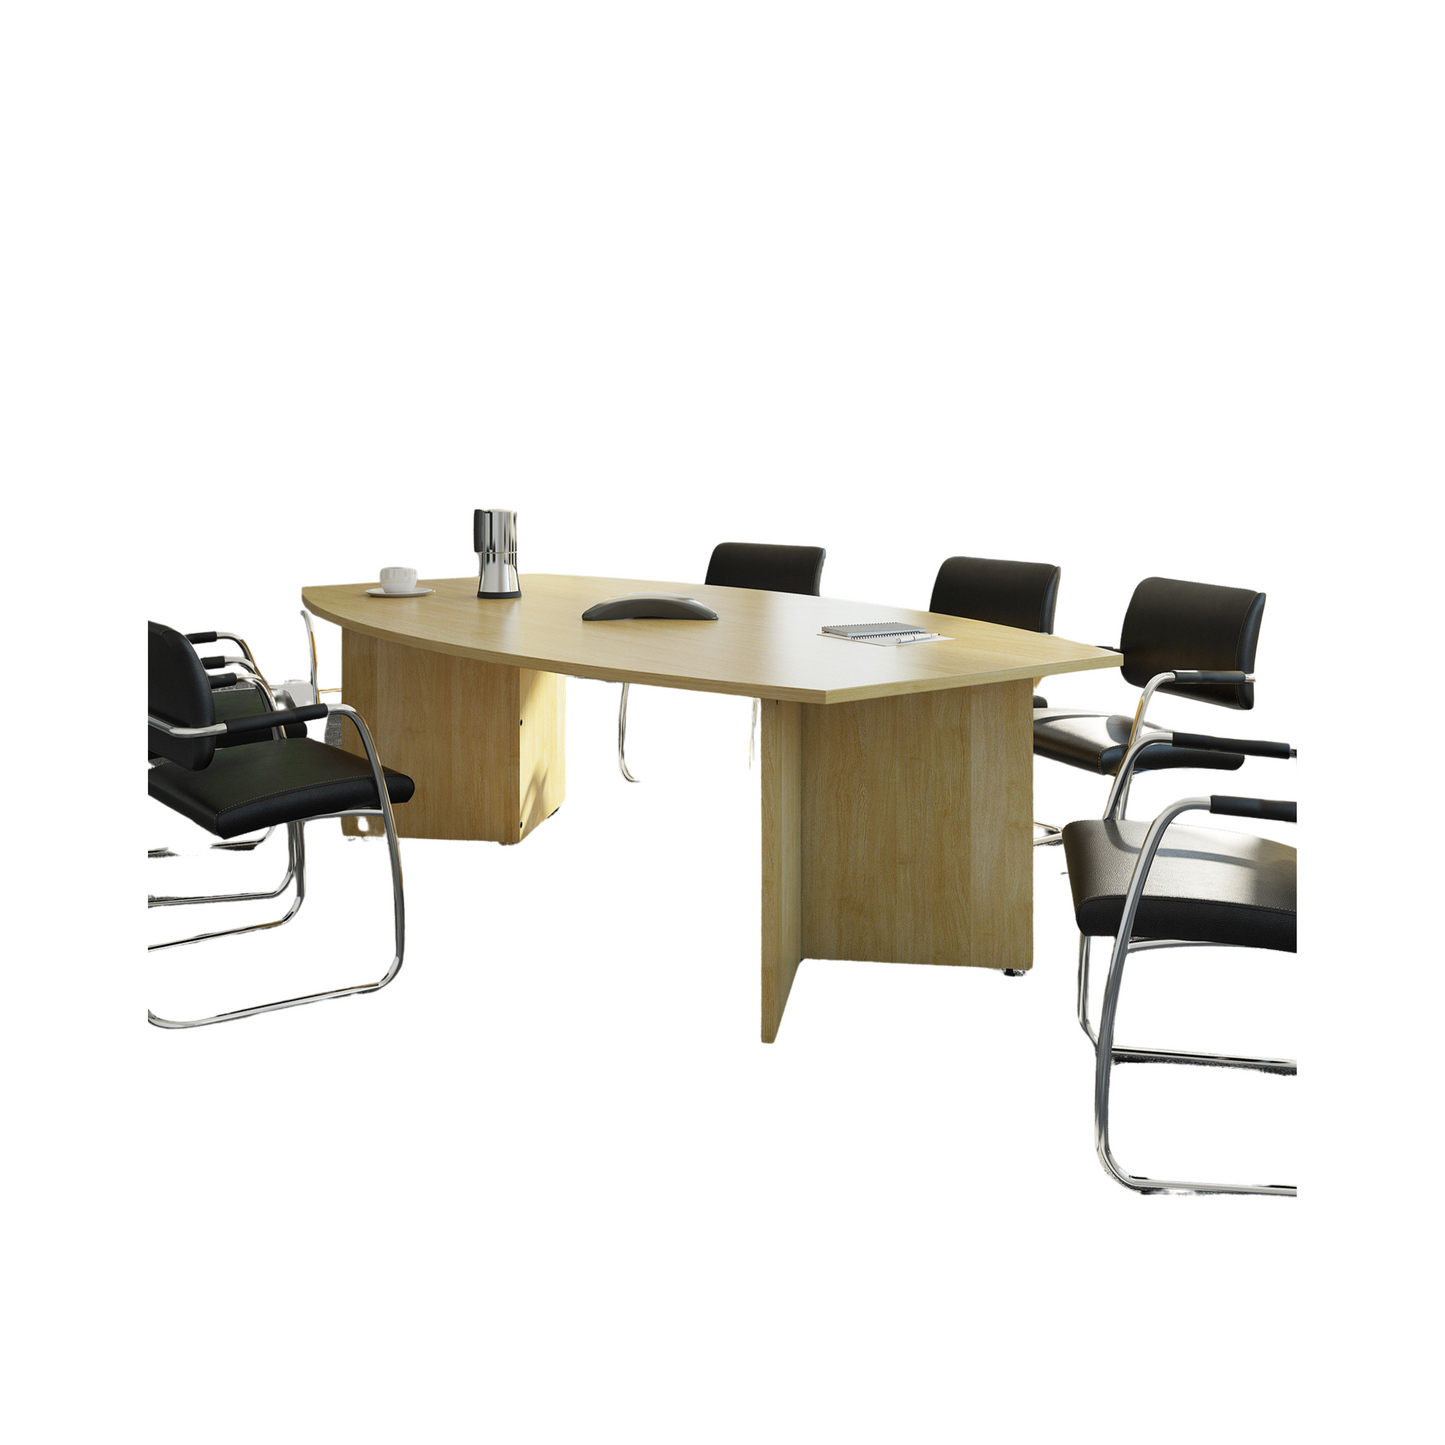 Arrow Head Leg Radial End Boardroom Table With 8 Meeting Room Cantilever Chair